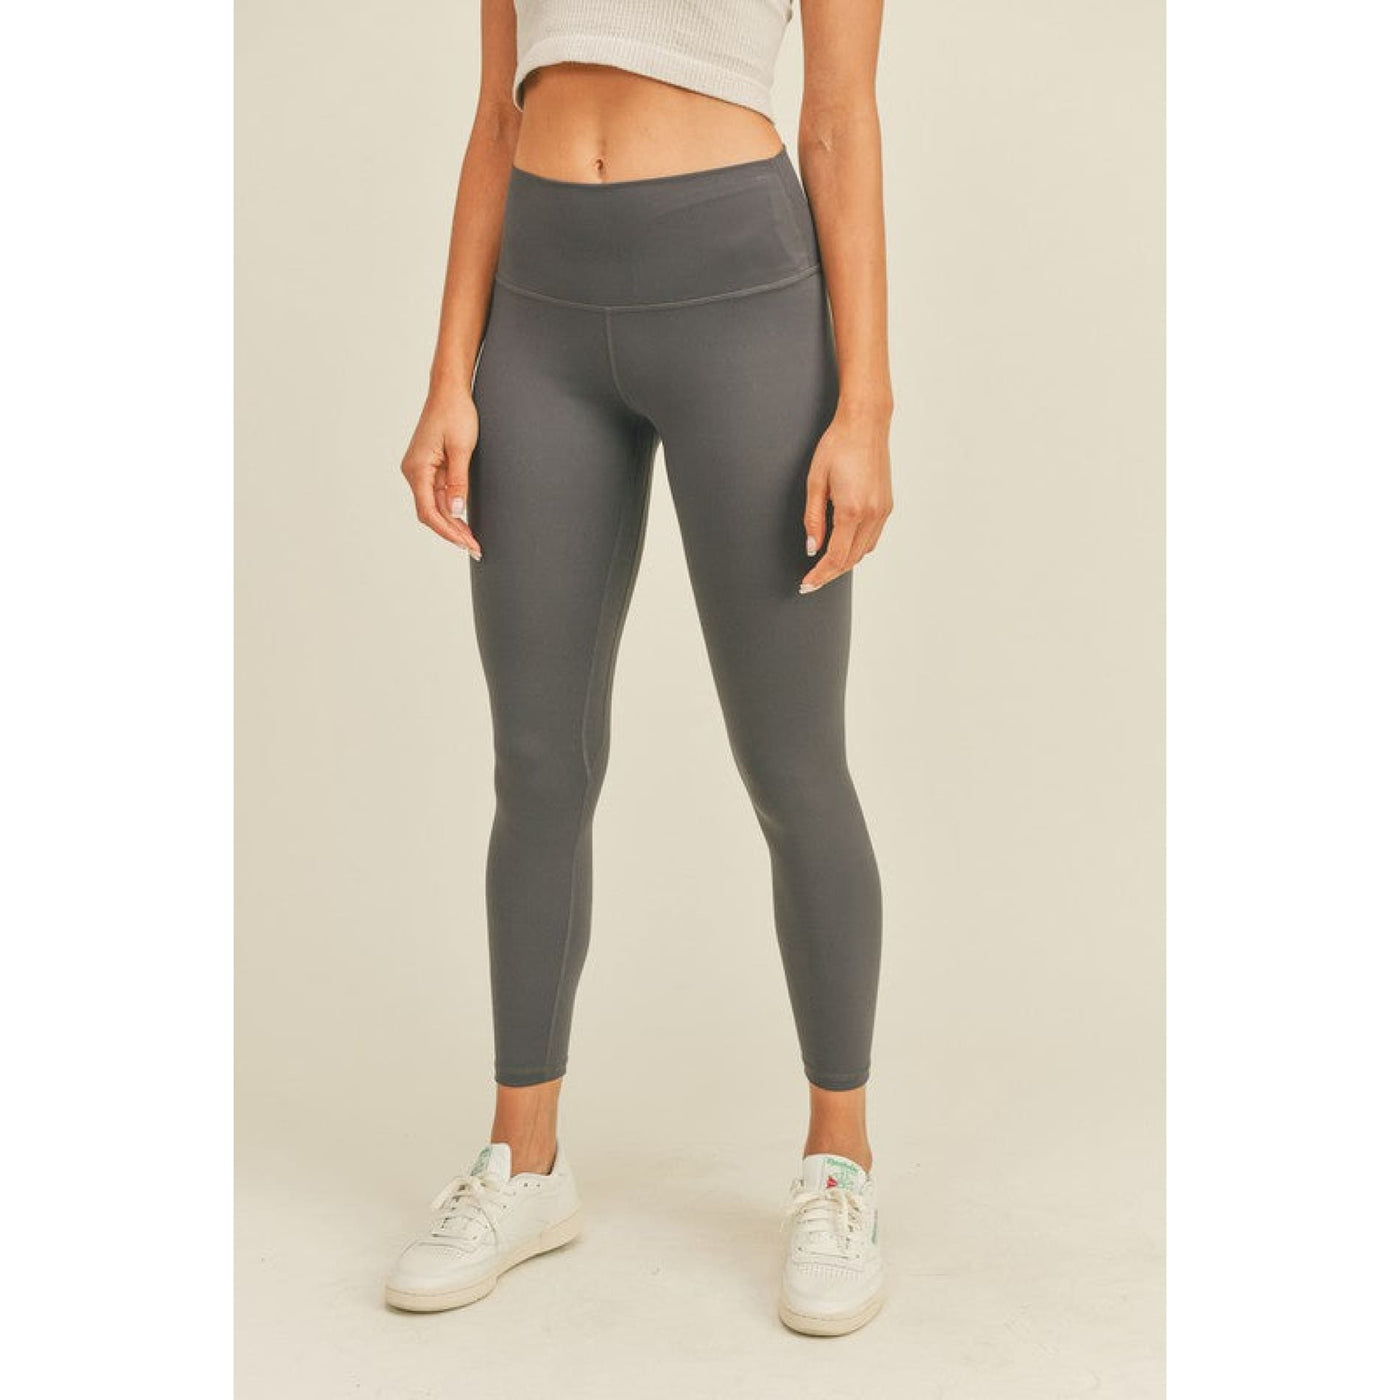 The Best Performance Legging - S / Charcoal / 0710 - 150 Bottoms